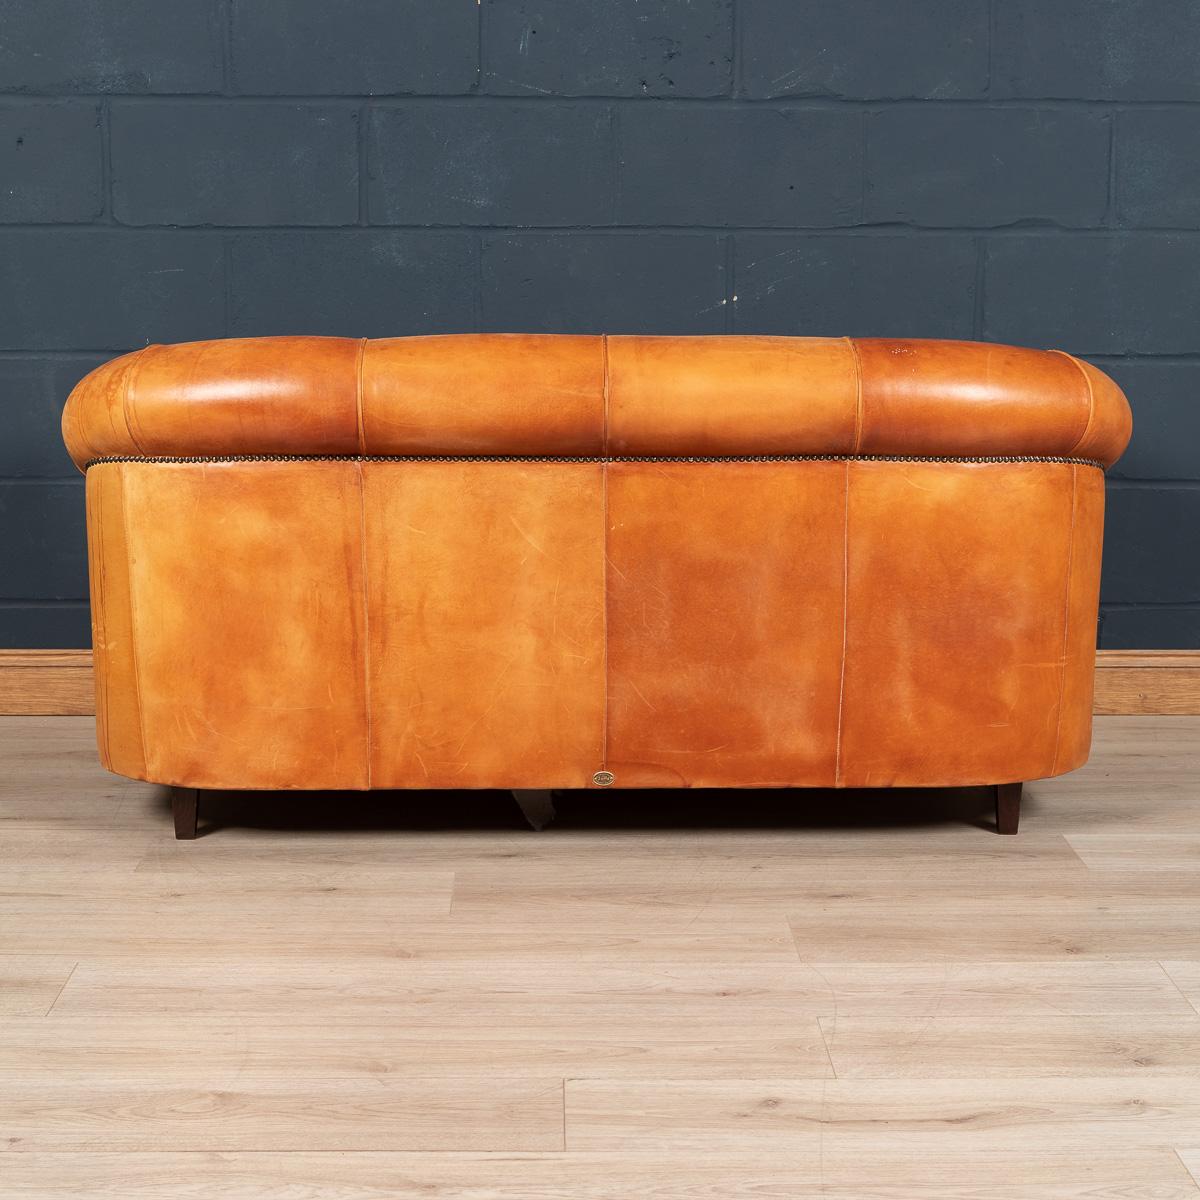 Late 20th Century Dutch Three-Seat Sheepskin Leather Sofa In Good Condition For Sale In Royal Tunbridge Wells, Kent